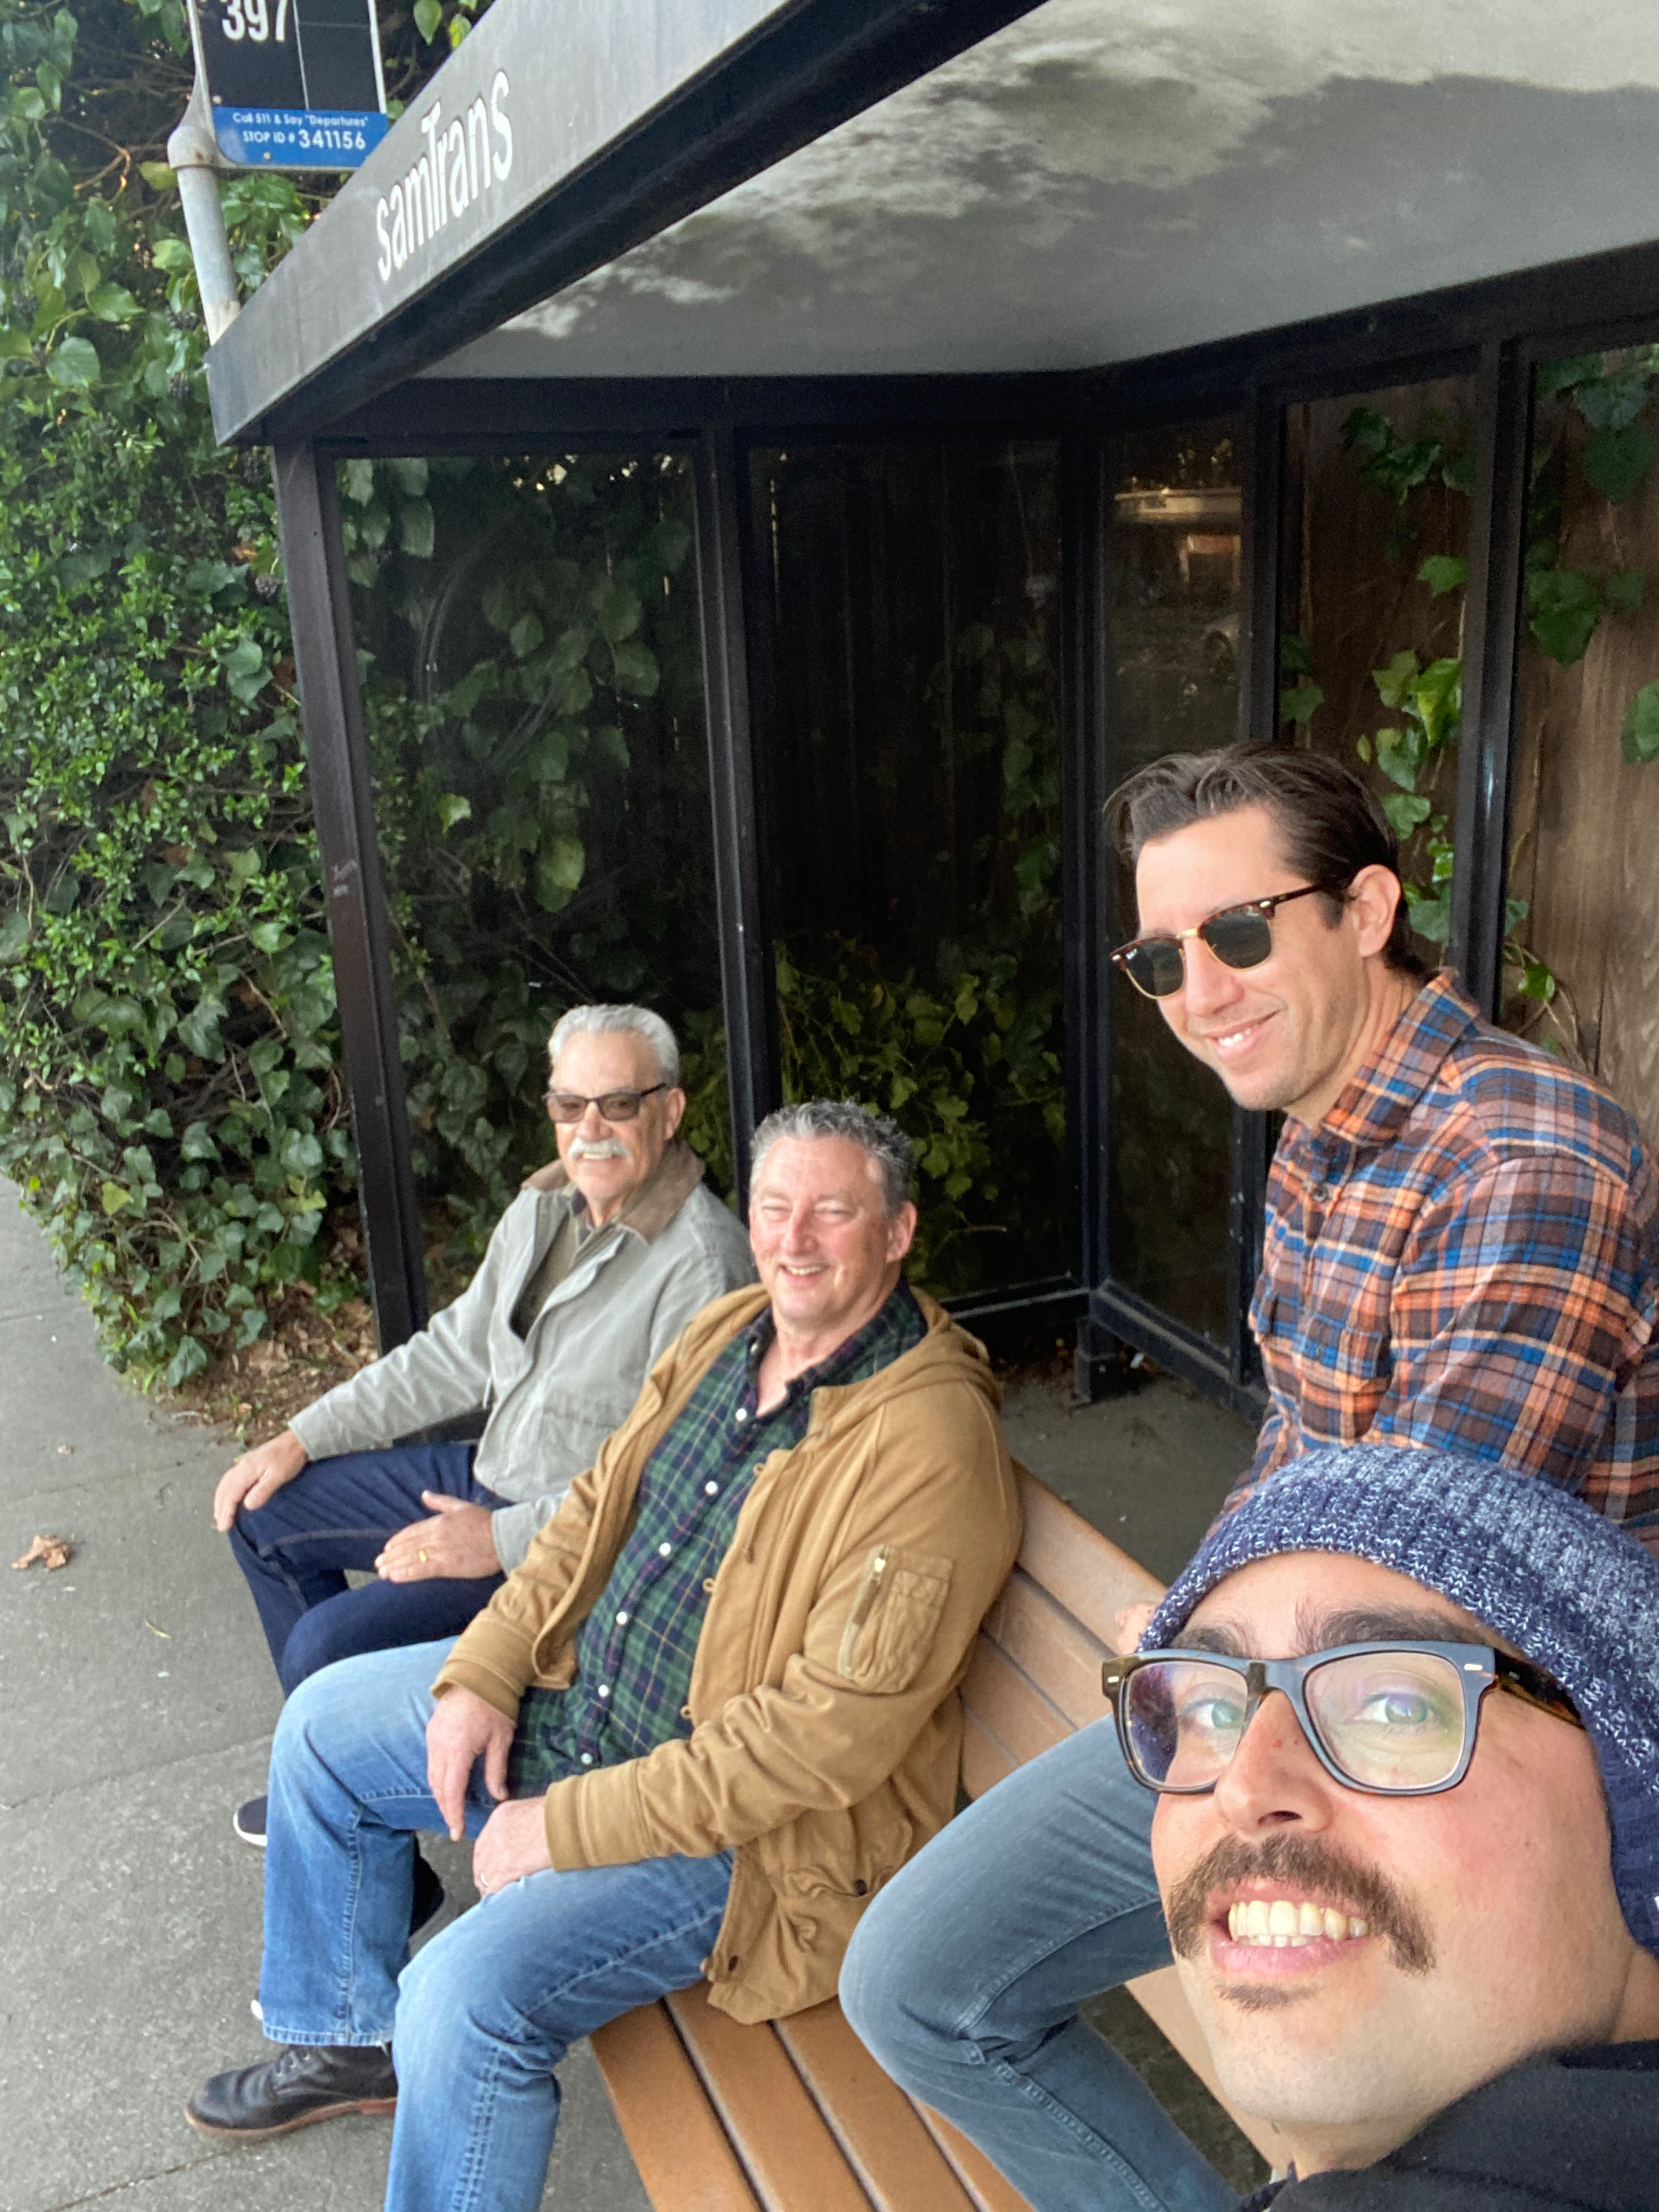 Mike, Max & 2 more neighbors waiting at a Samtrans bus stop